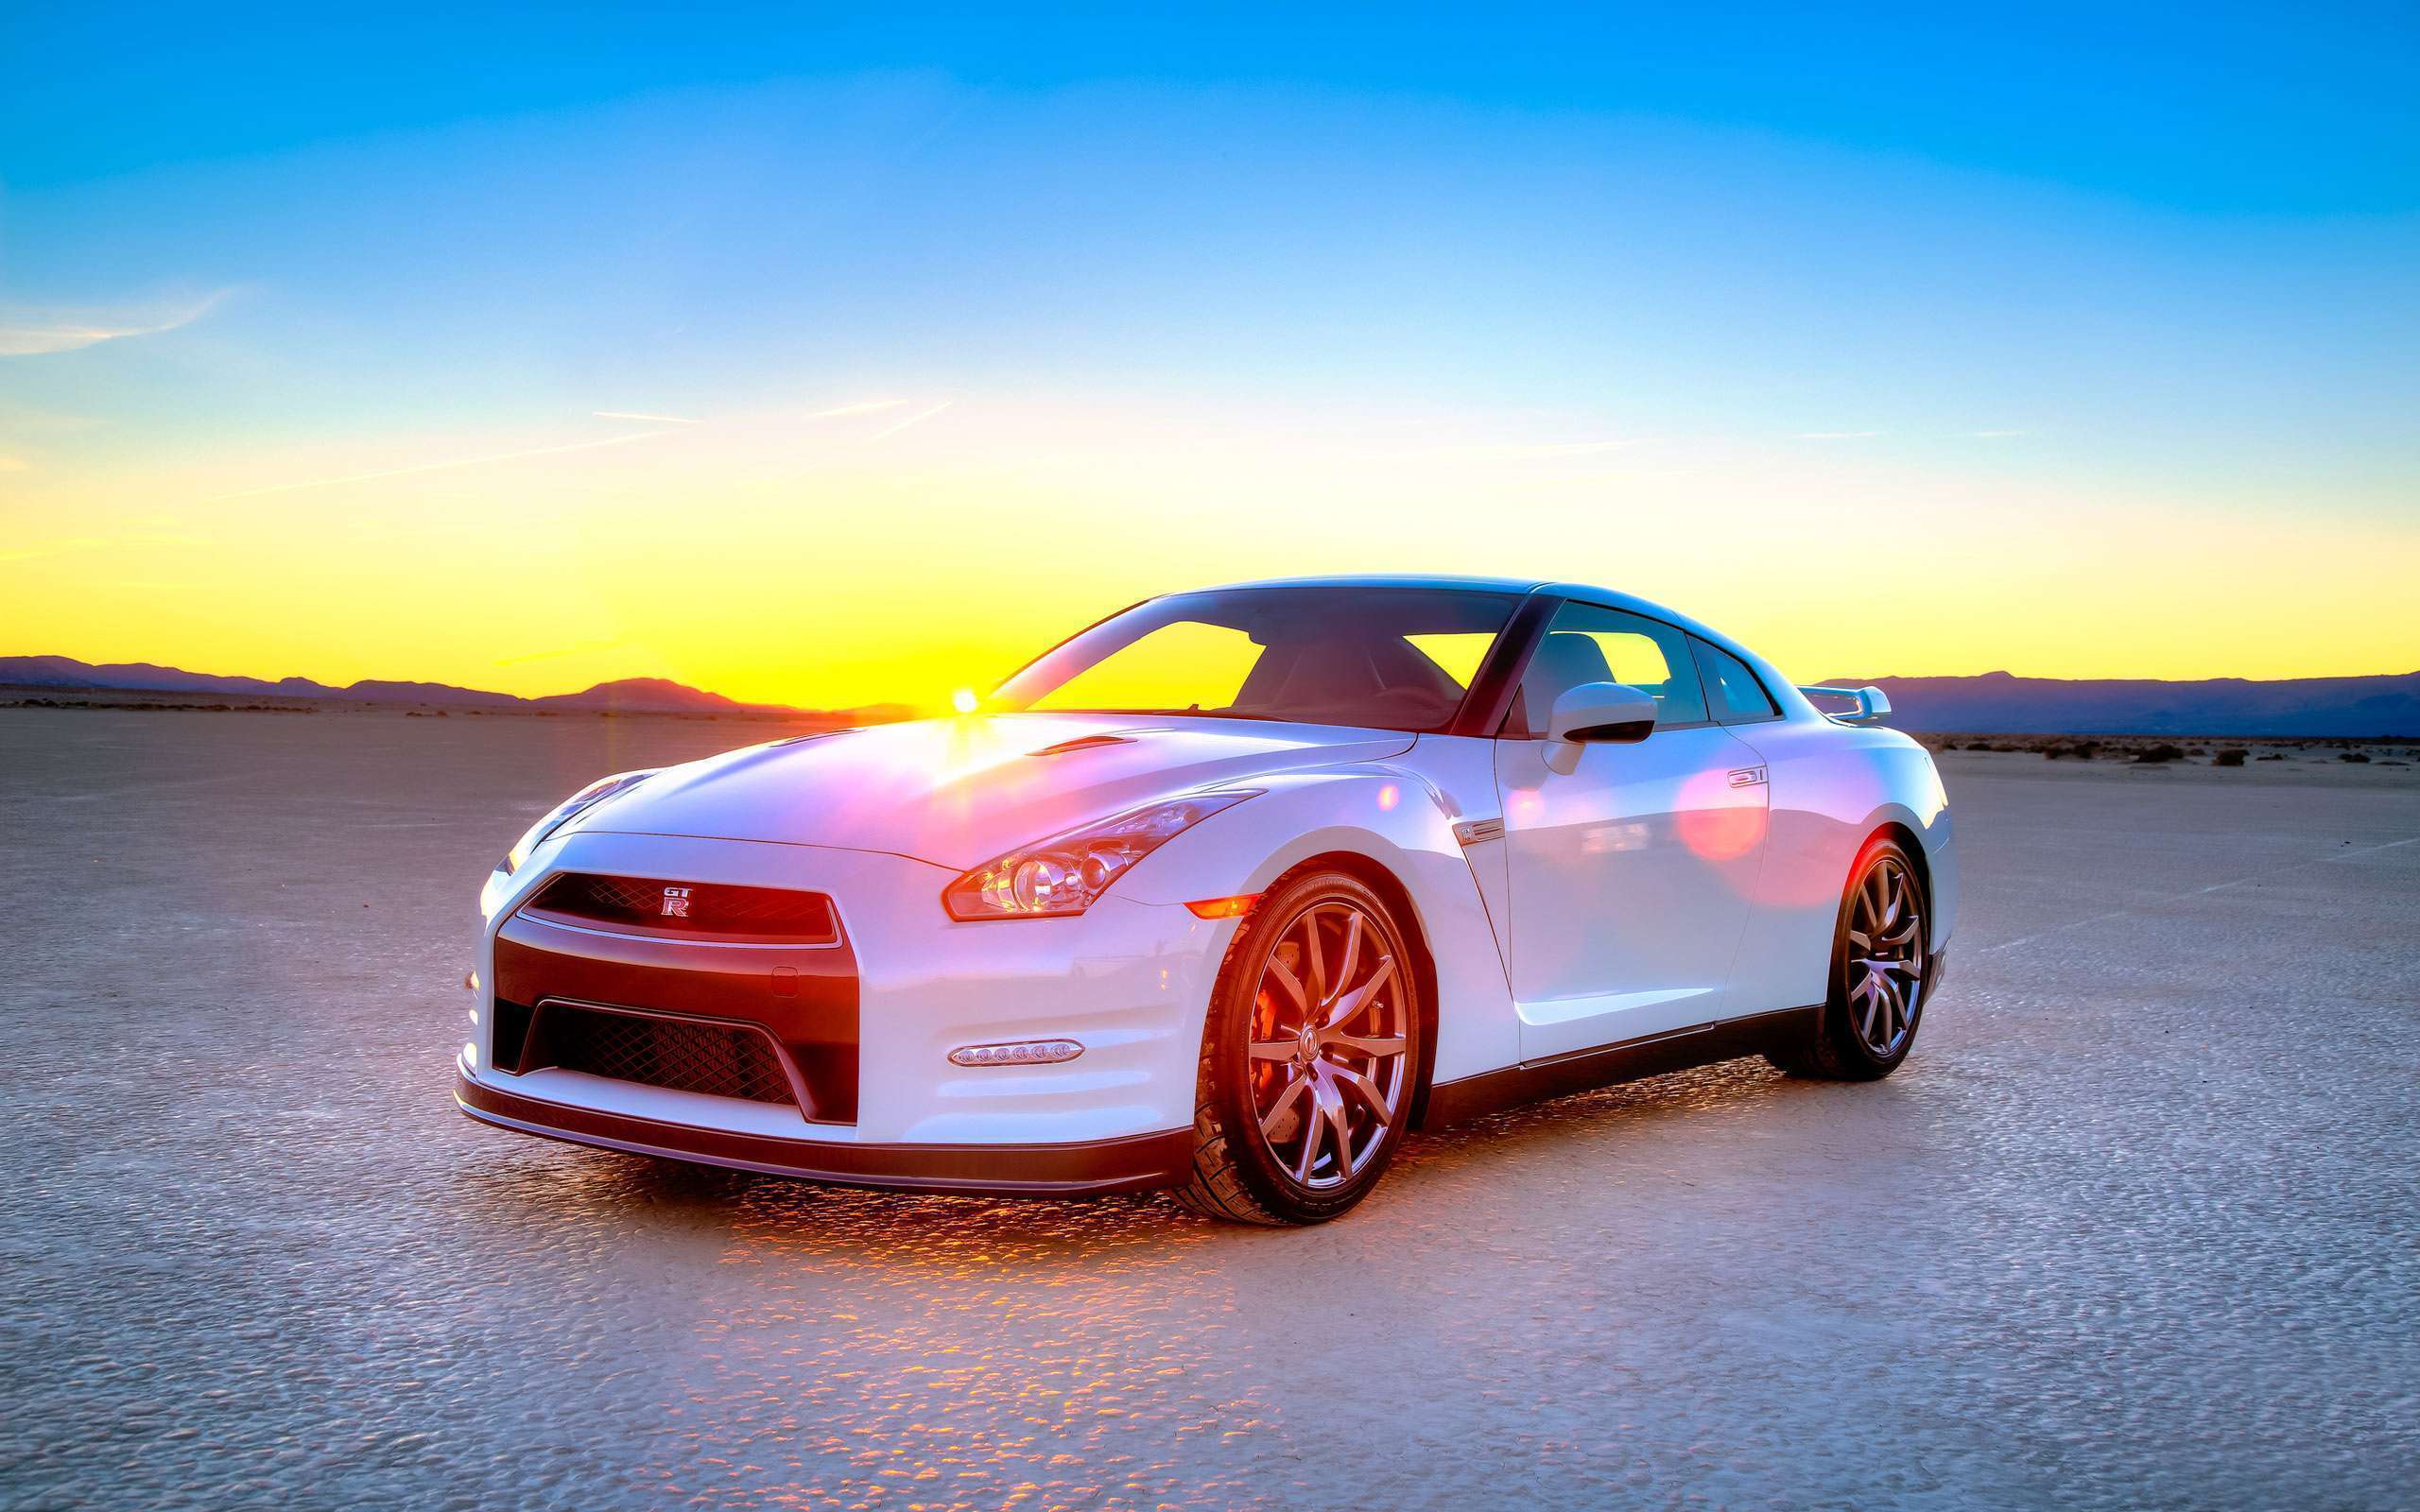 View Of 2014 Nissan Gt R Hd Wallpapers Hd Car Wallpapers